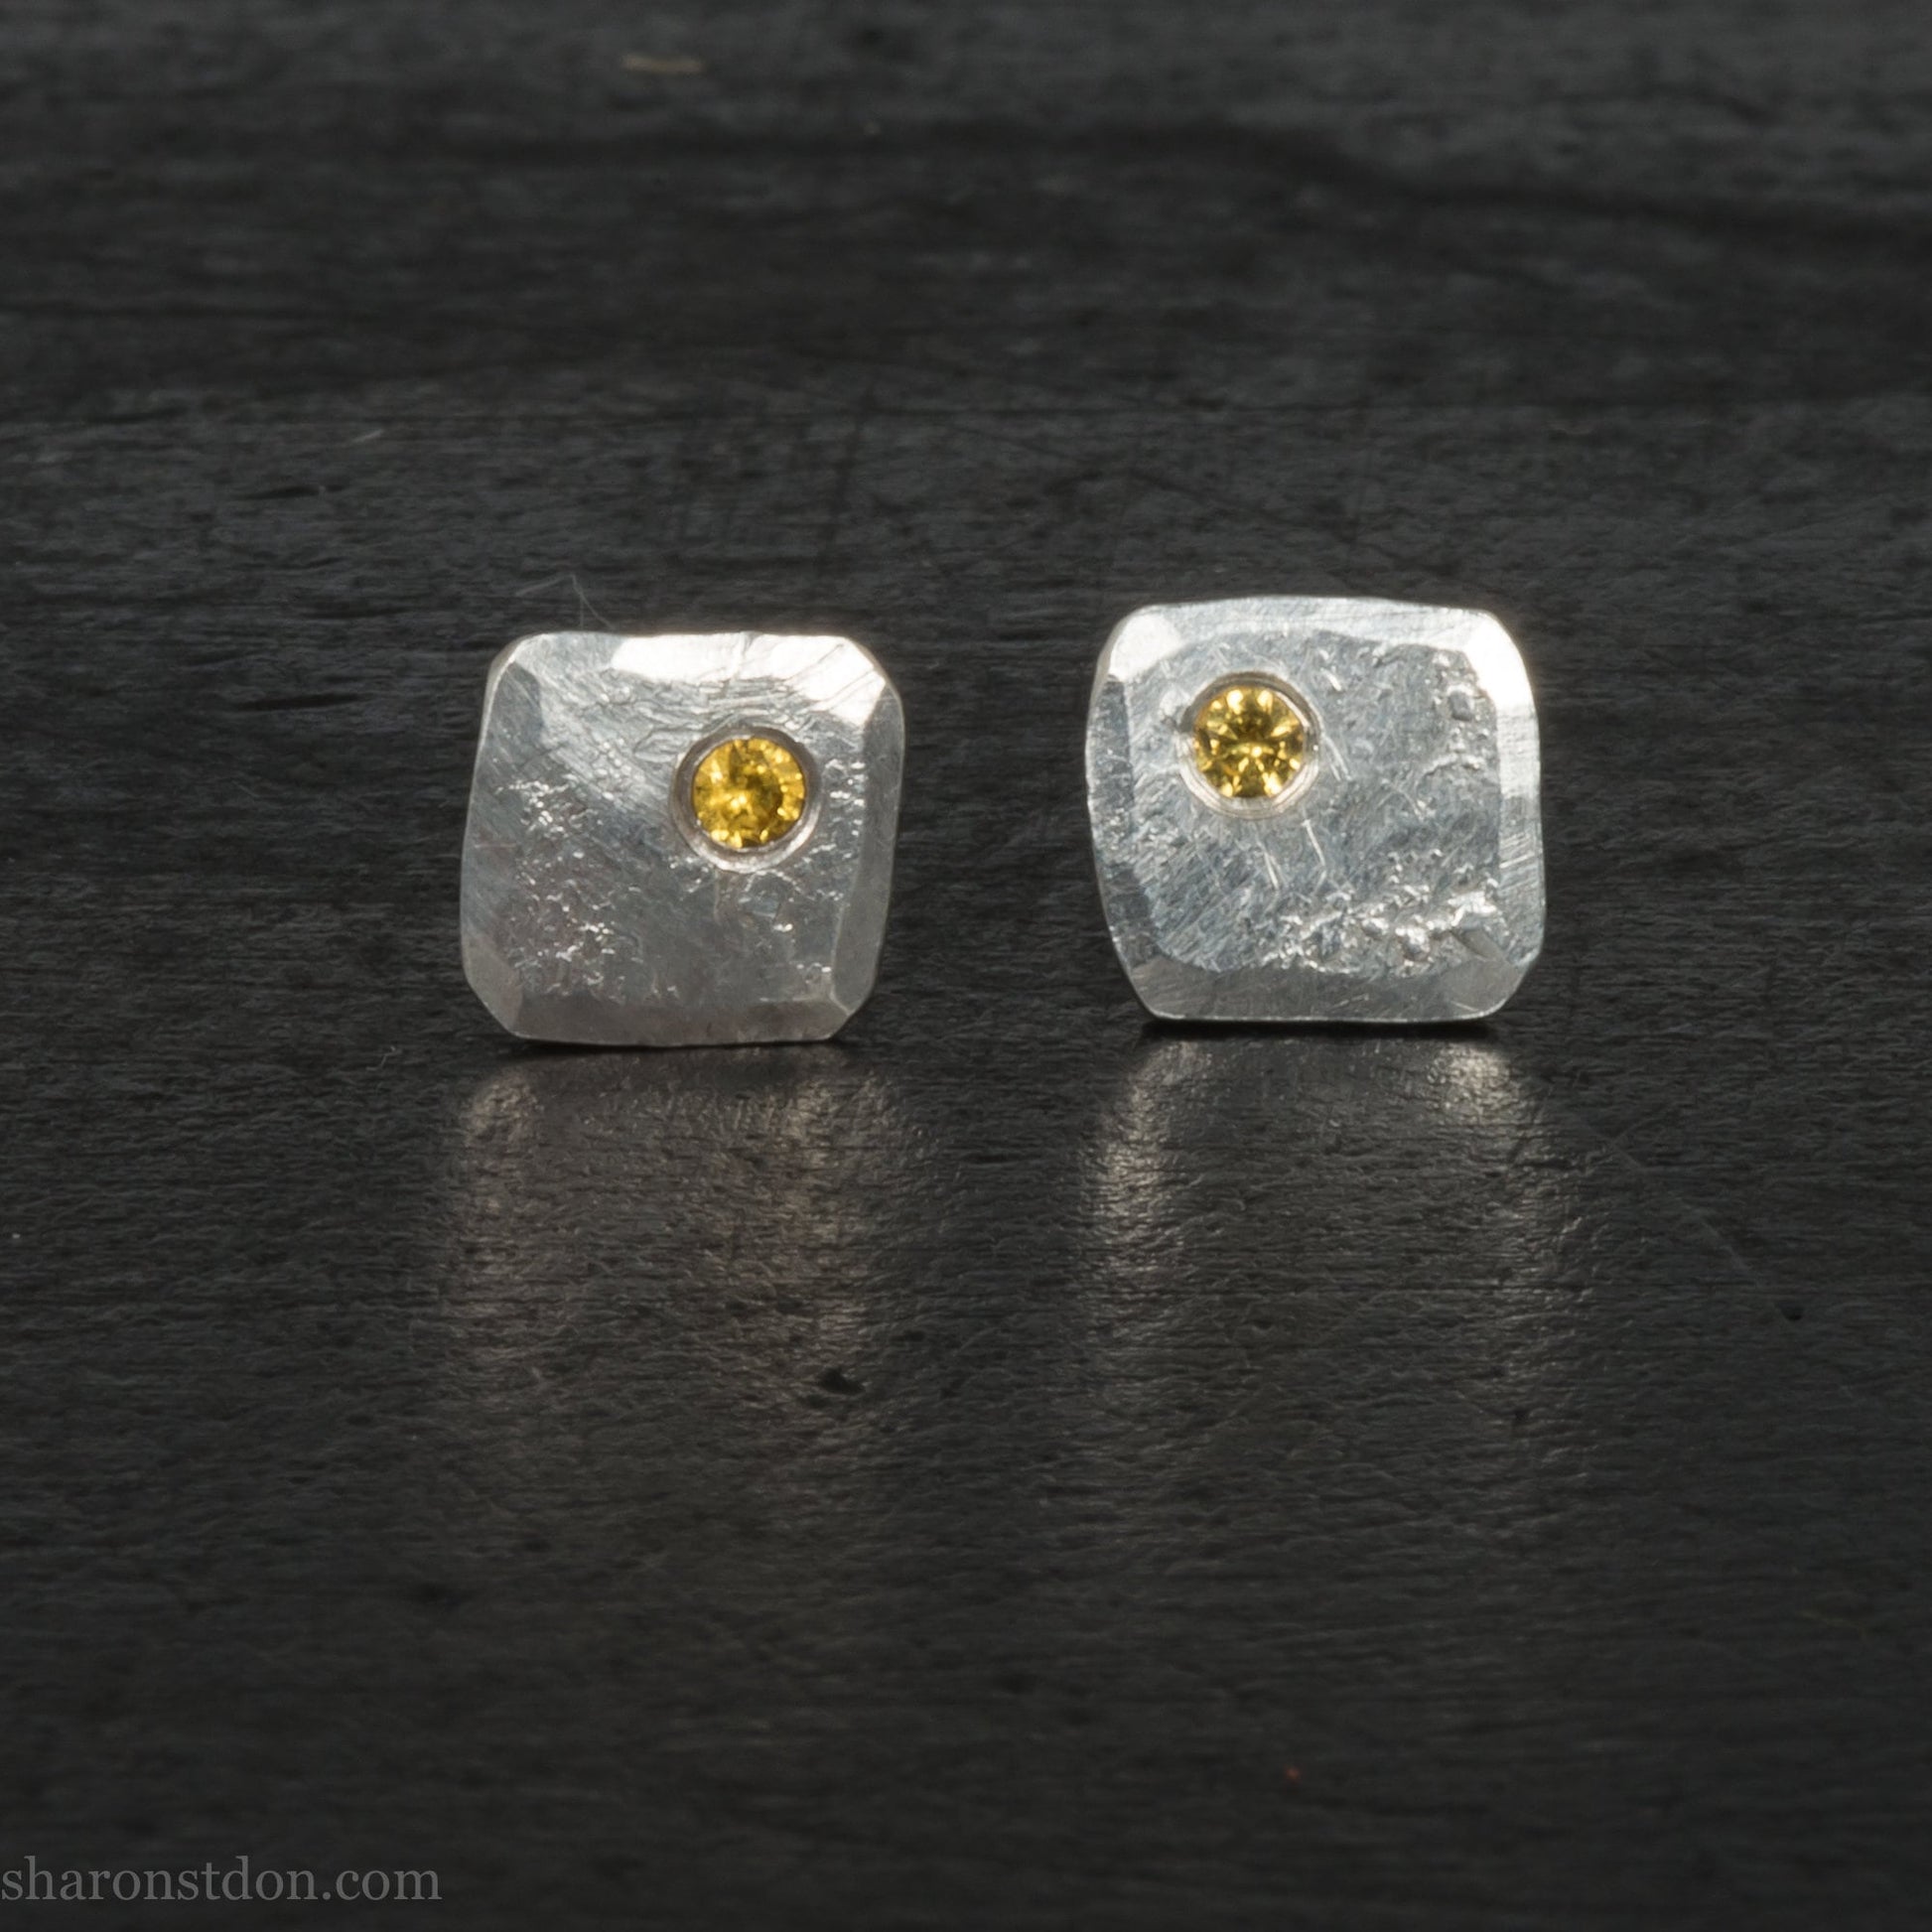 Handmade 925 sterling silver stud earrings with golden yellow topaz gemstones. Small square stud earrings made by Sharon SaintDon in North America.